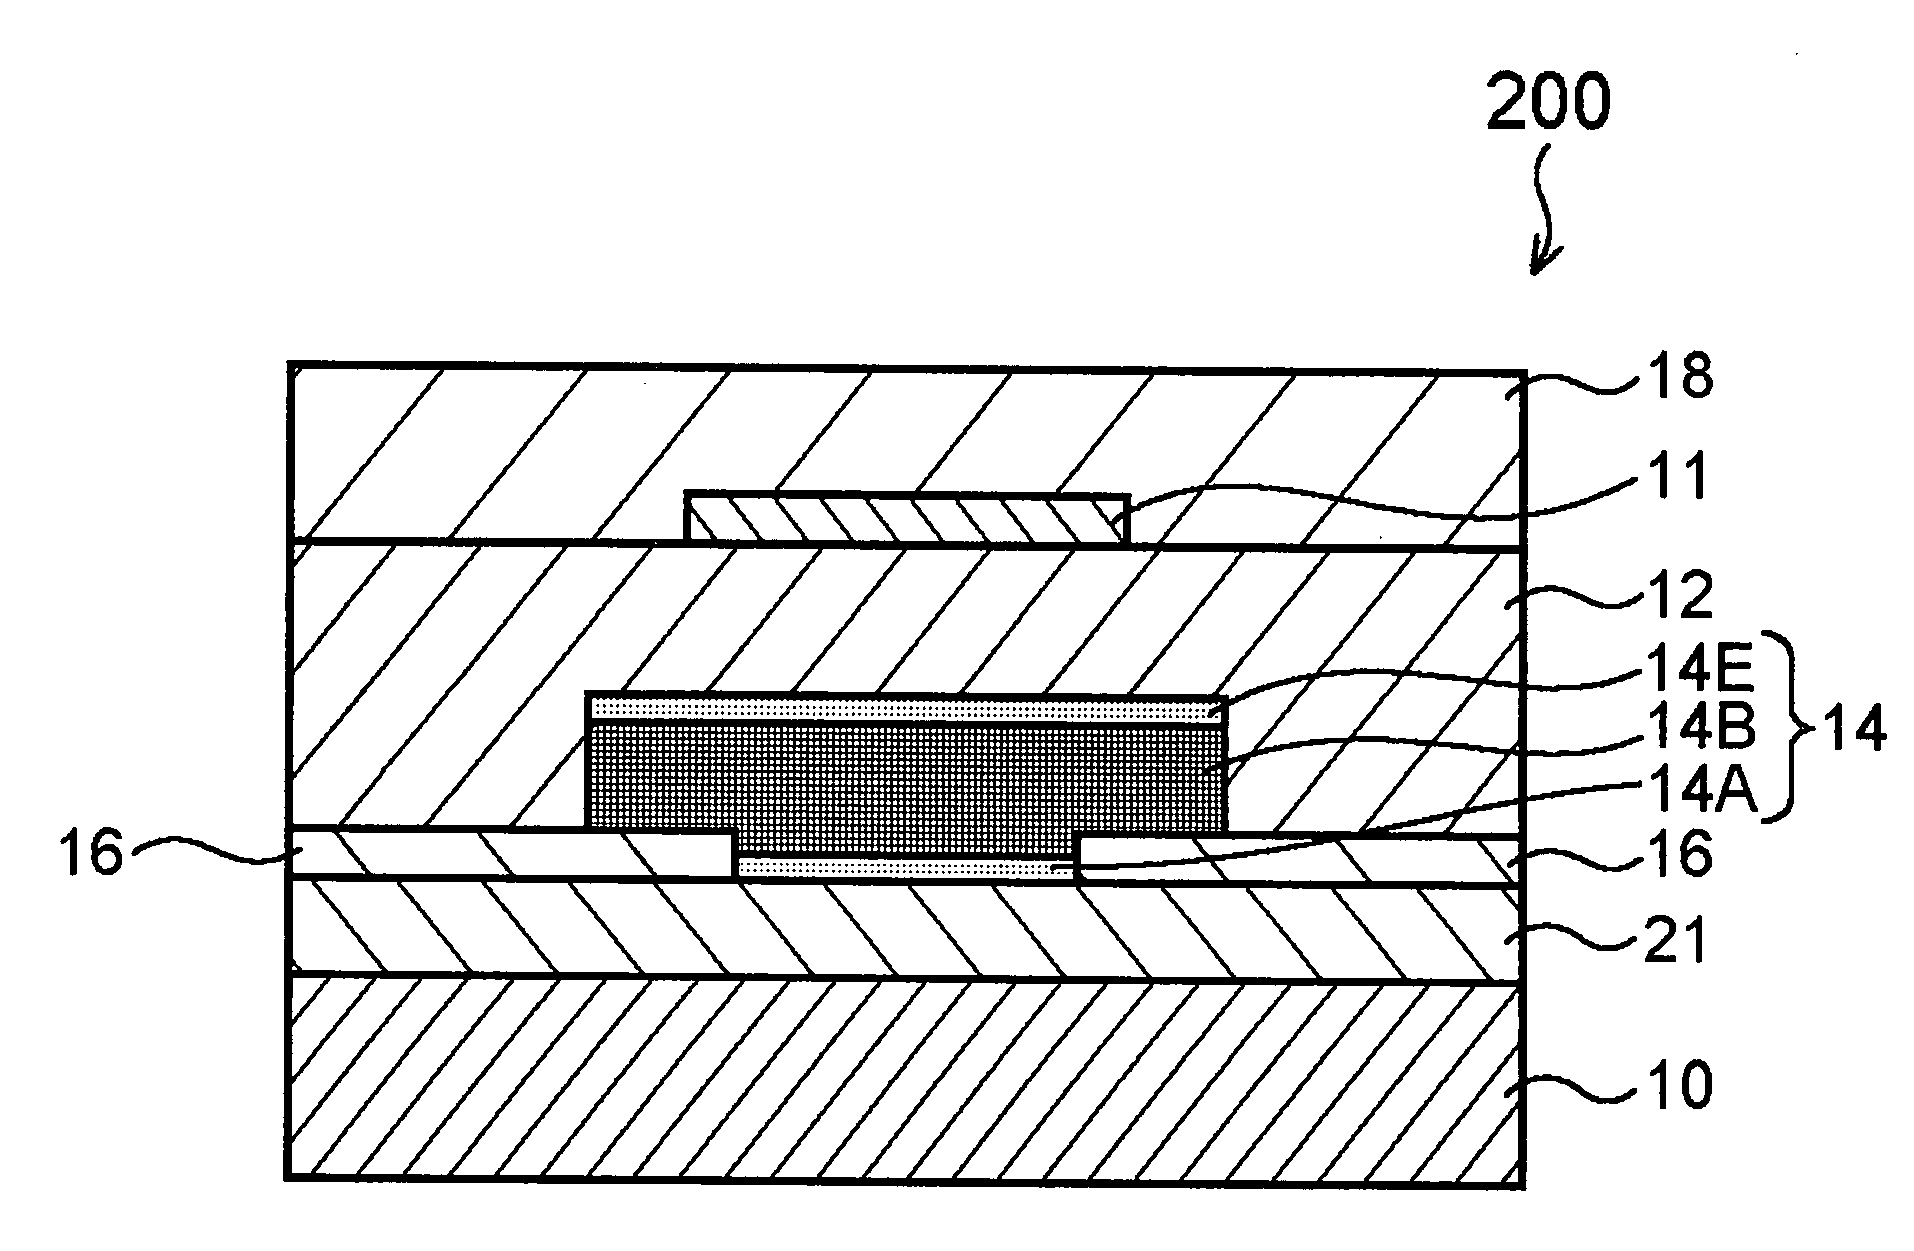 Thin-film device and method of fabricating the same